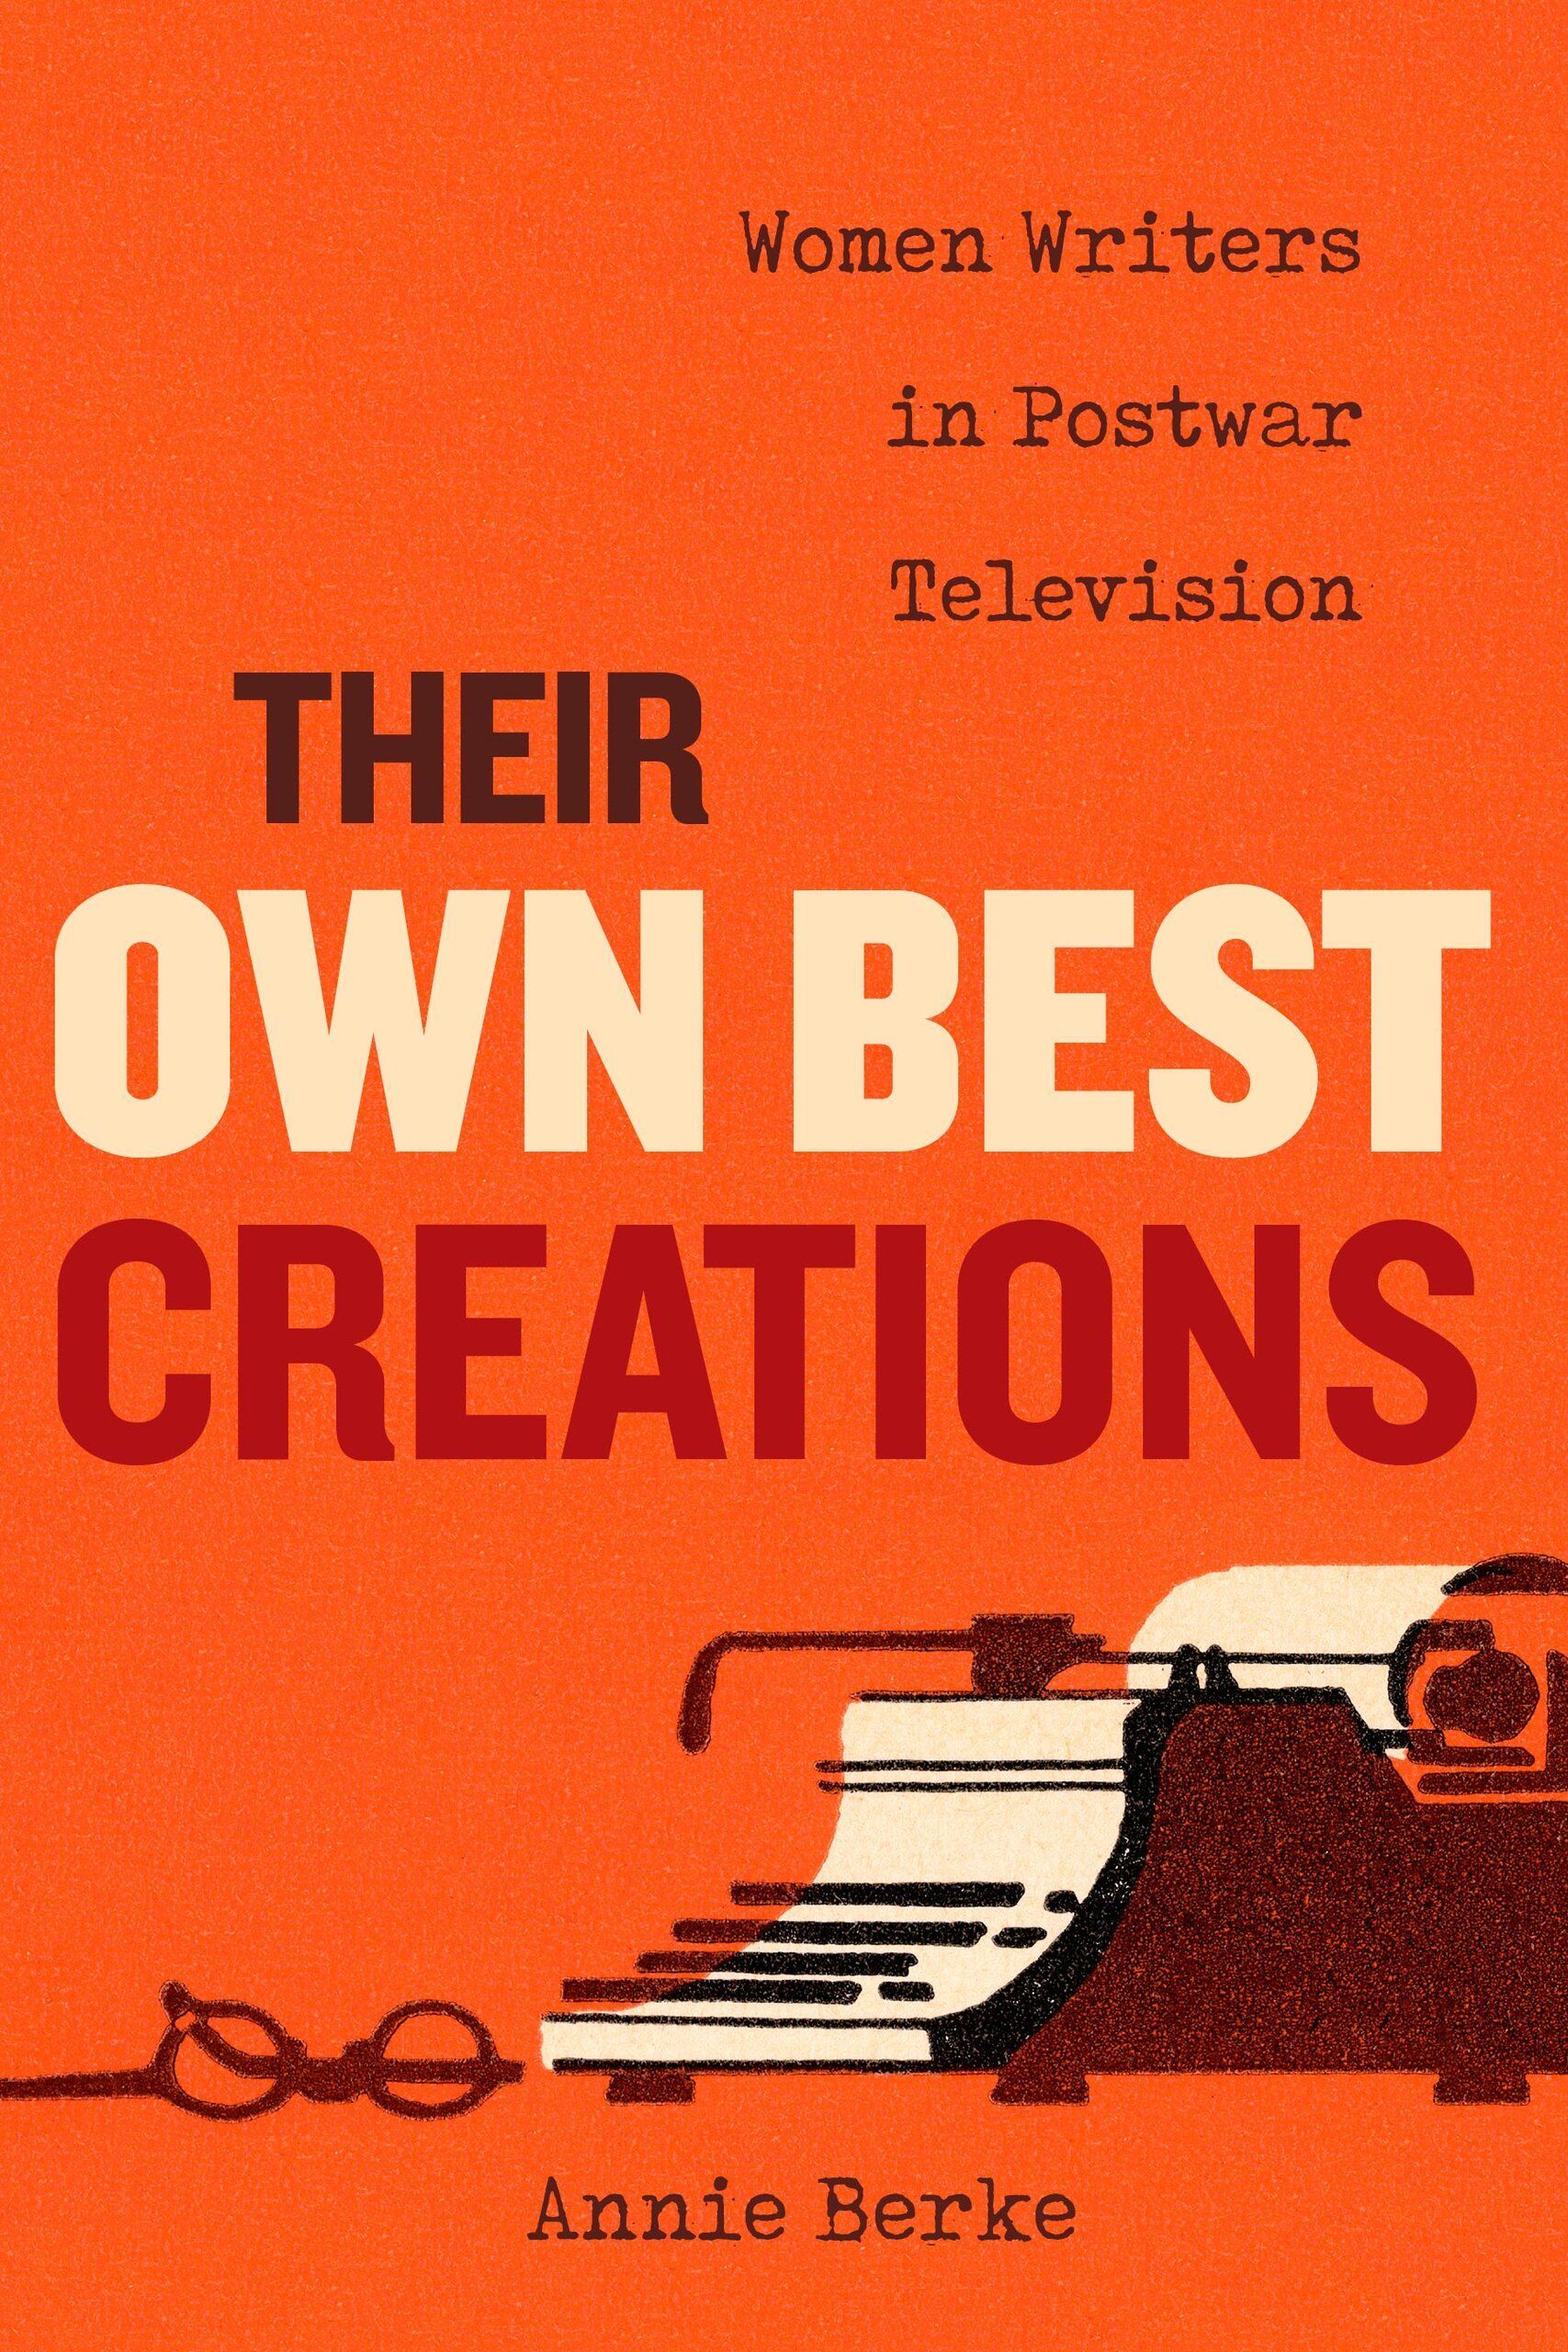 The Art of the “Girl-Writer”: On Annie Berke’s “Their Own Best Creations”